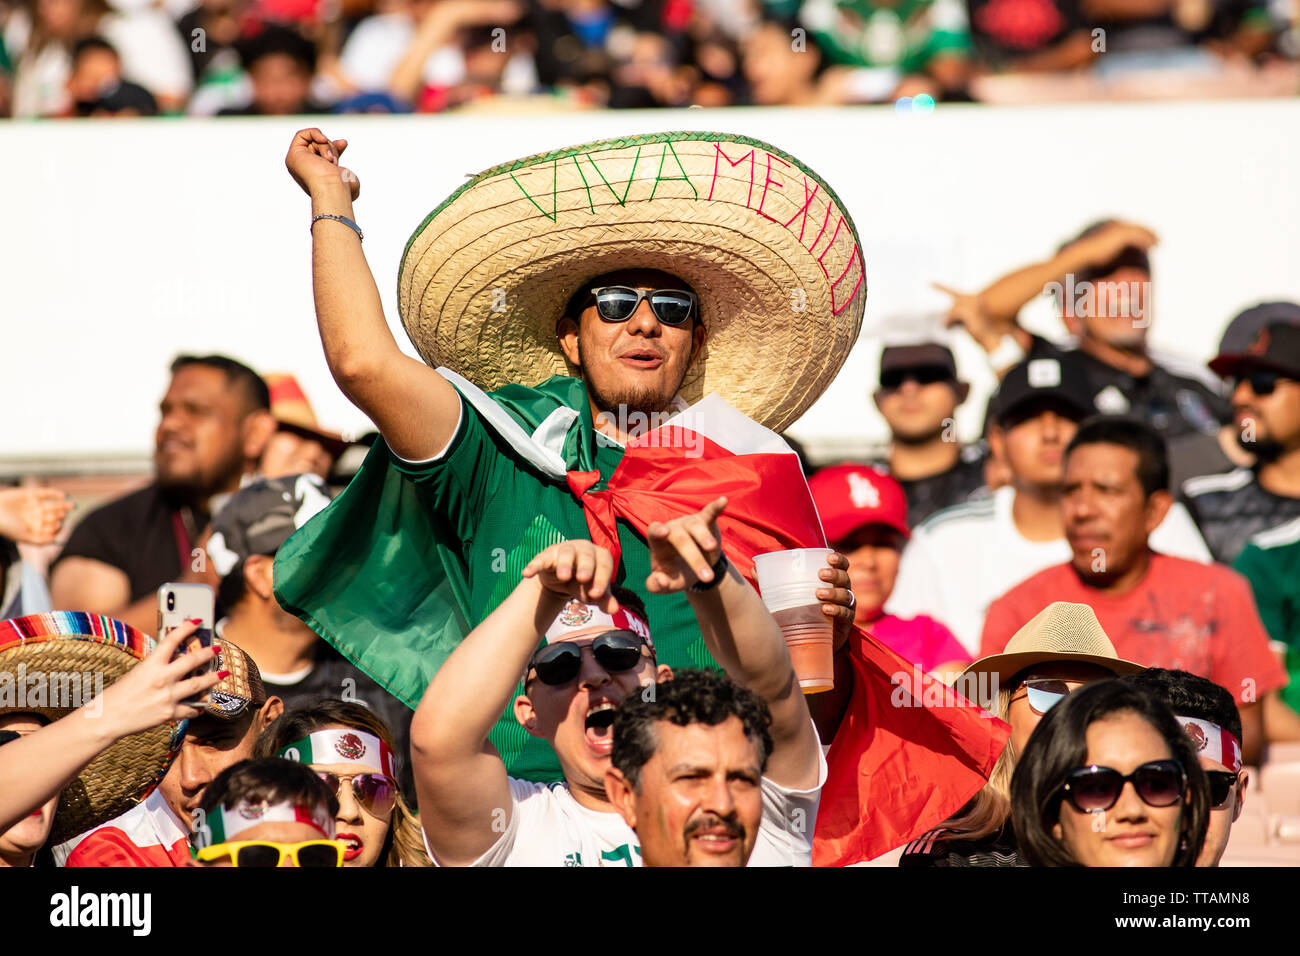 Pasadena, USA. 15th June, 2019. Mexico fans came out in force to see their team dominate Cuba in their opening match of the Gold Cup. Credit: Ben Nichols/Alamy Live News Stock Photo